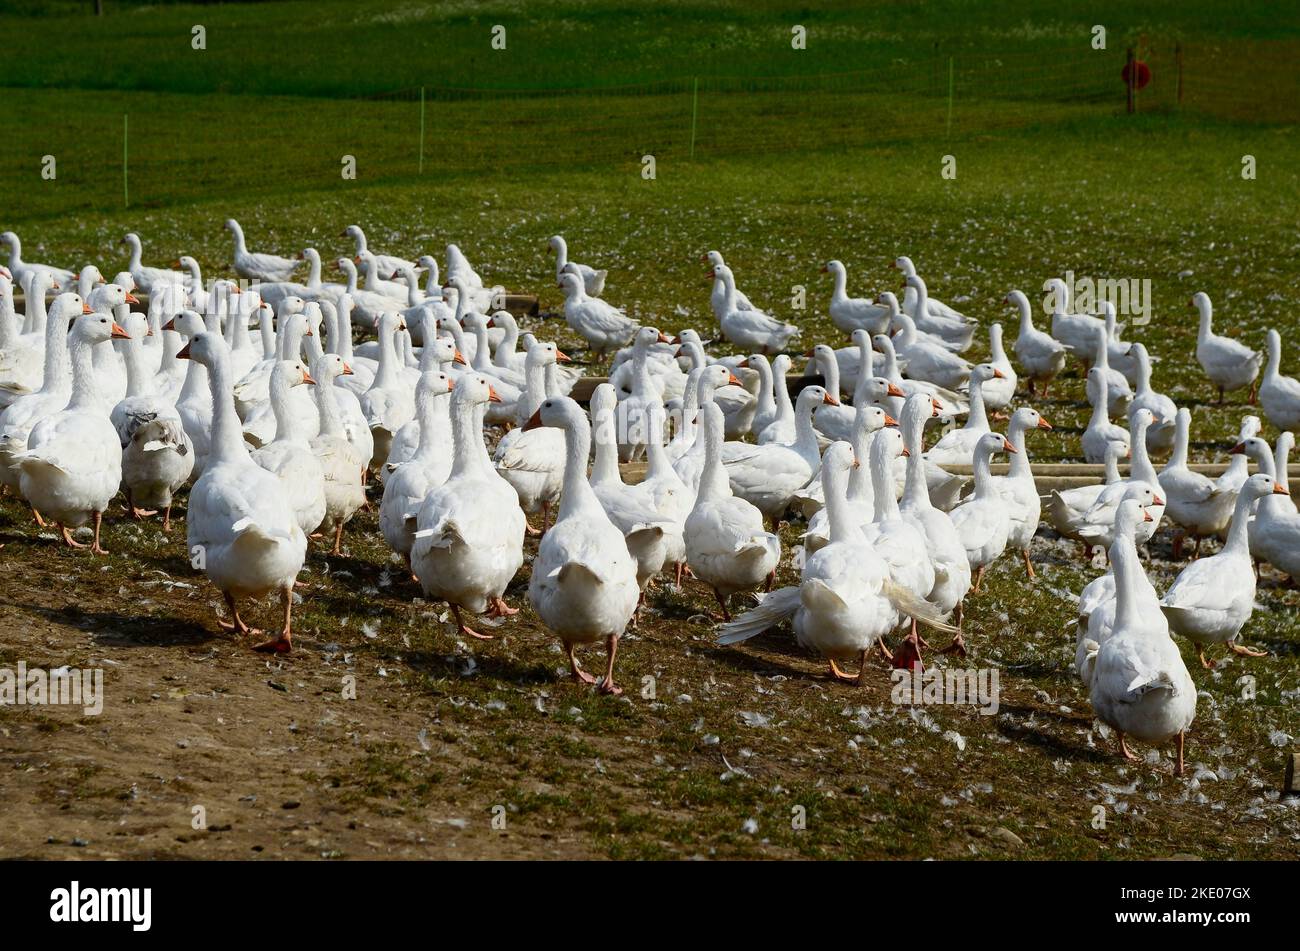 Austria, large group of white geese on pasture Stock Photo